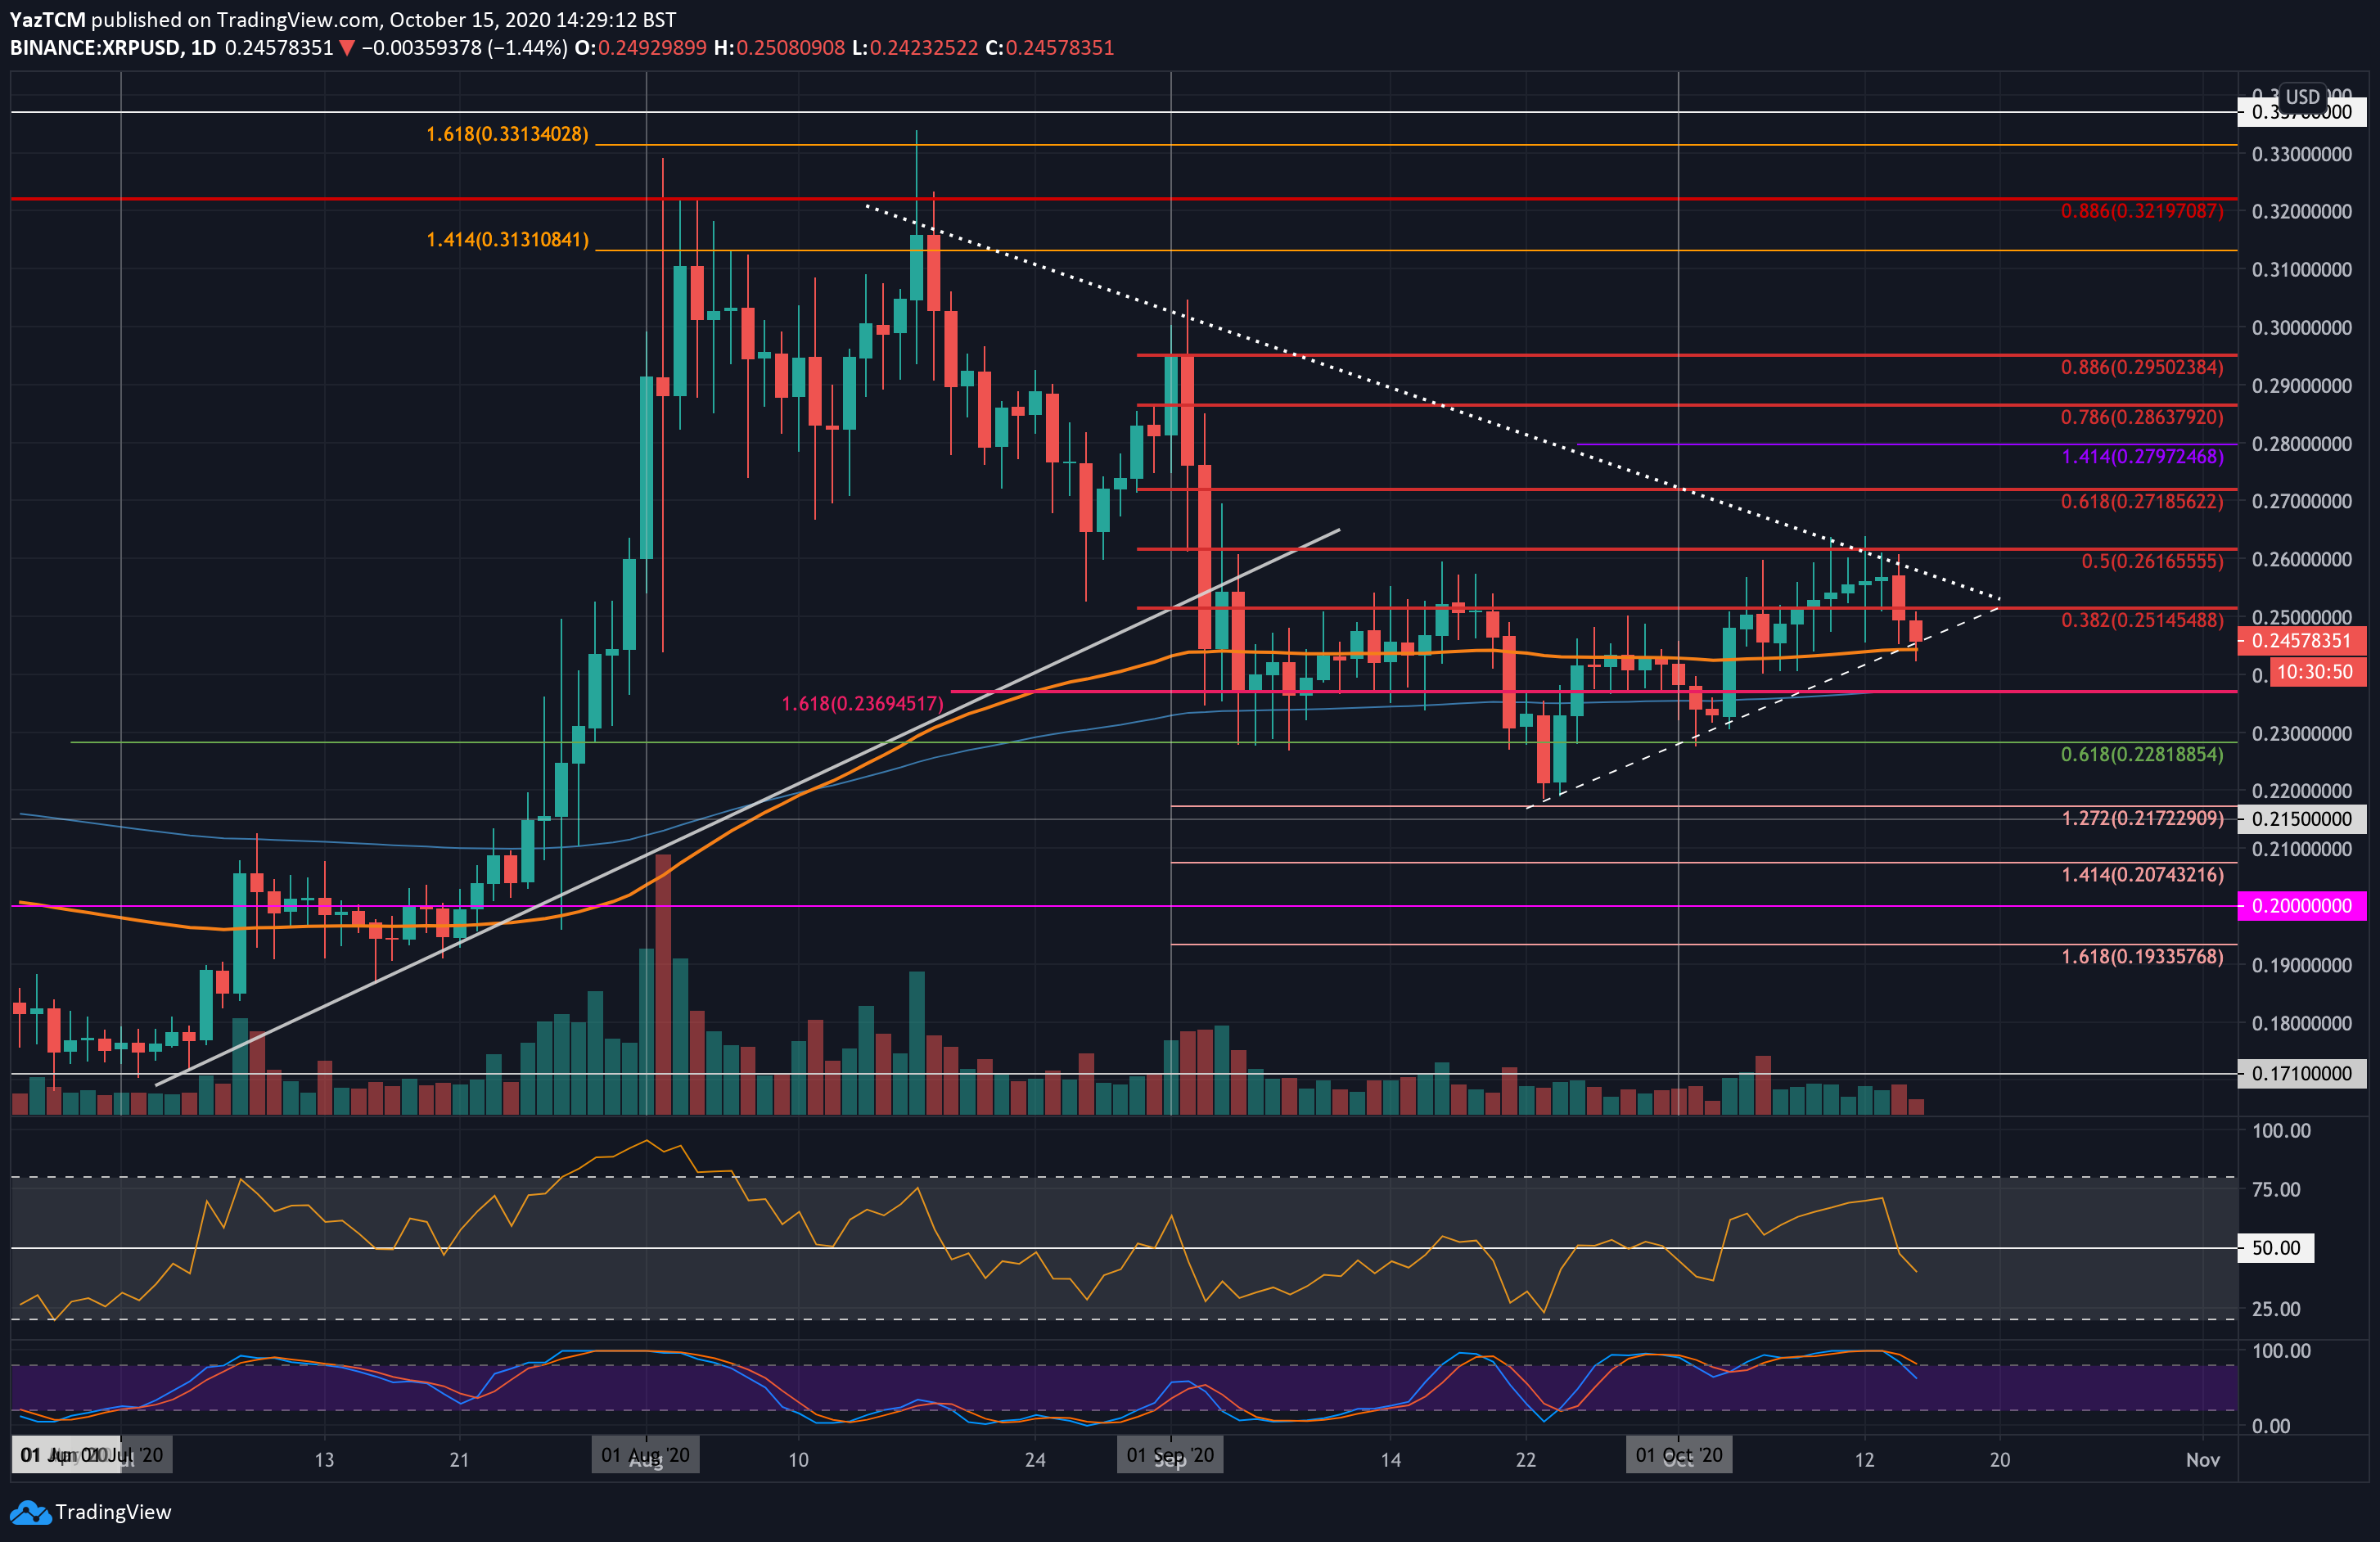 Ripple Bears Resurface to Test 100 EMA Support, Will it Hold? (XRP Price Analysis)